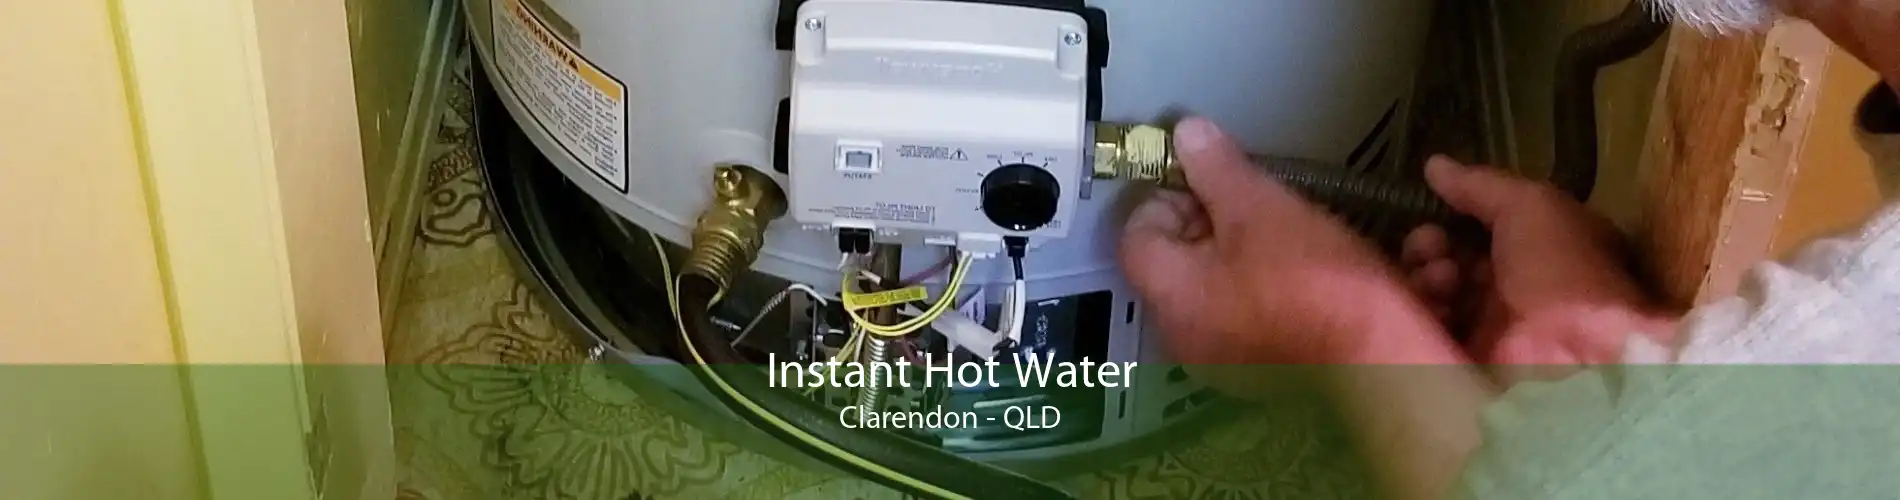 Instant Hot Water Clarendon - QLD